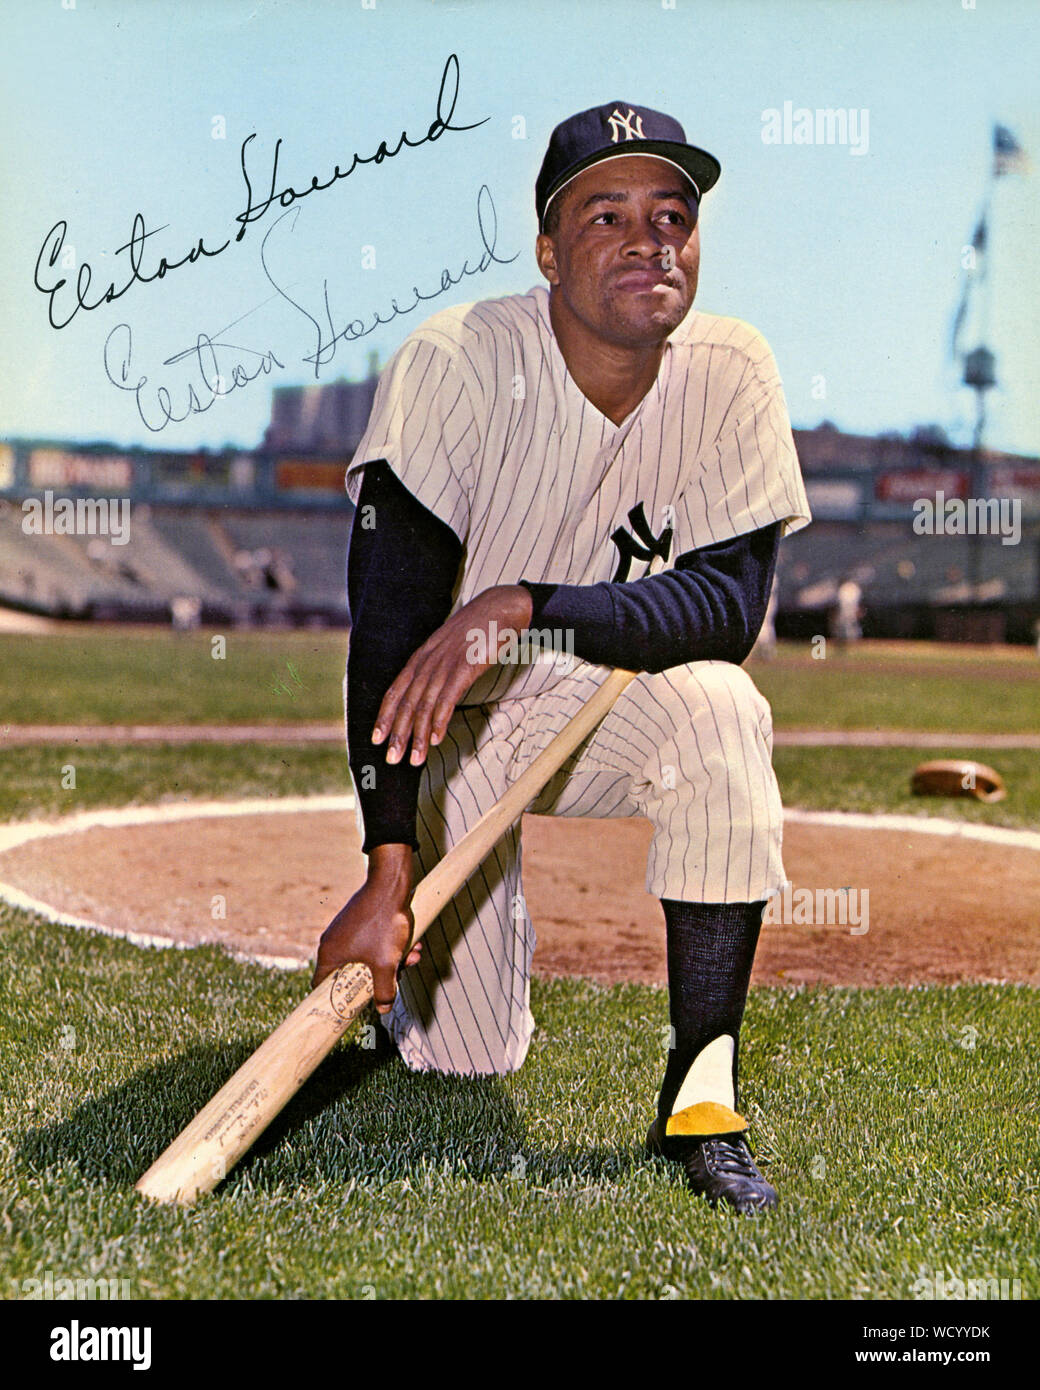 Autographed color photo of Elston Howard who was a star baseball player with the New York Yankees in the 1950s and 1960s. Stock Photo